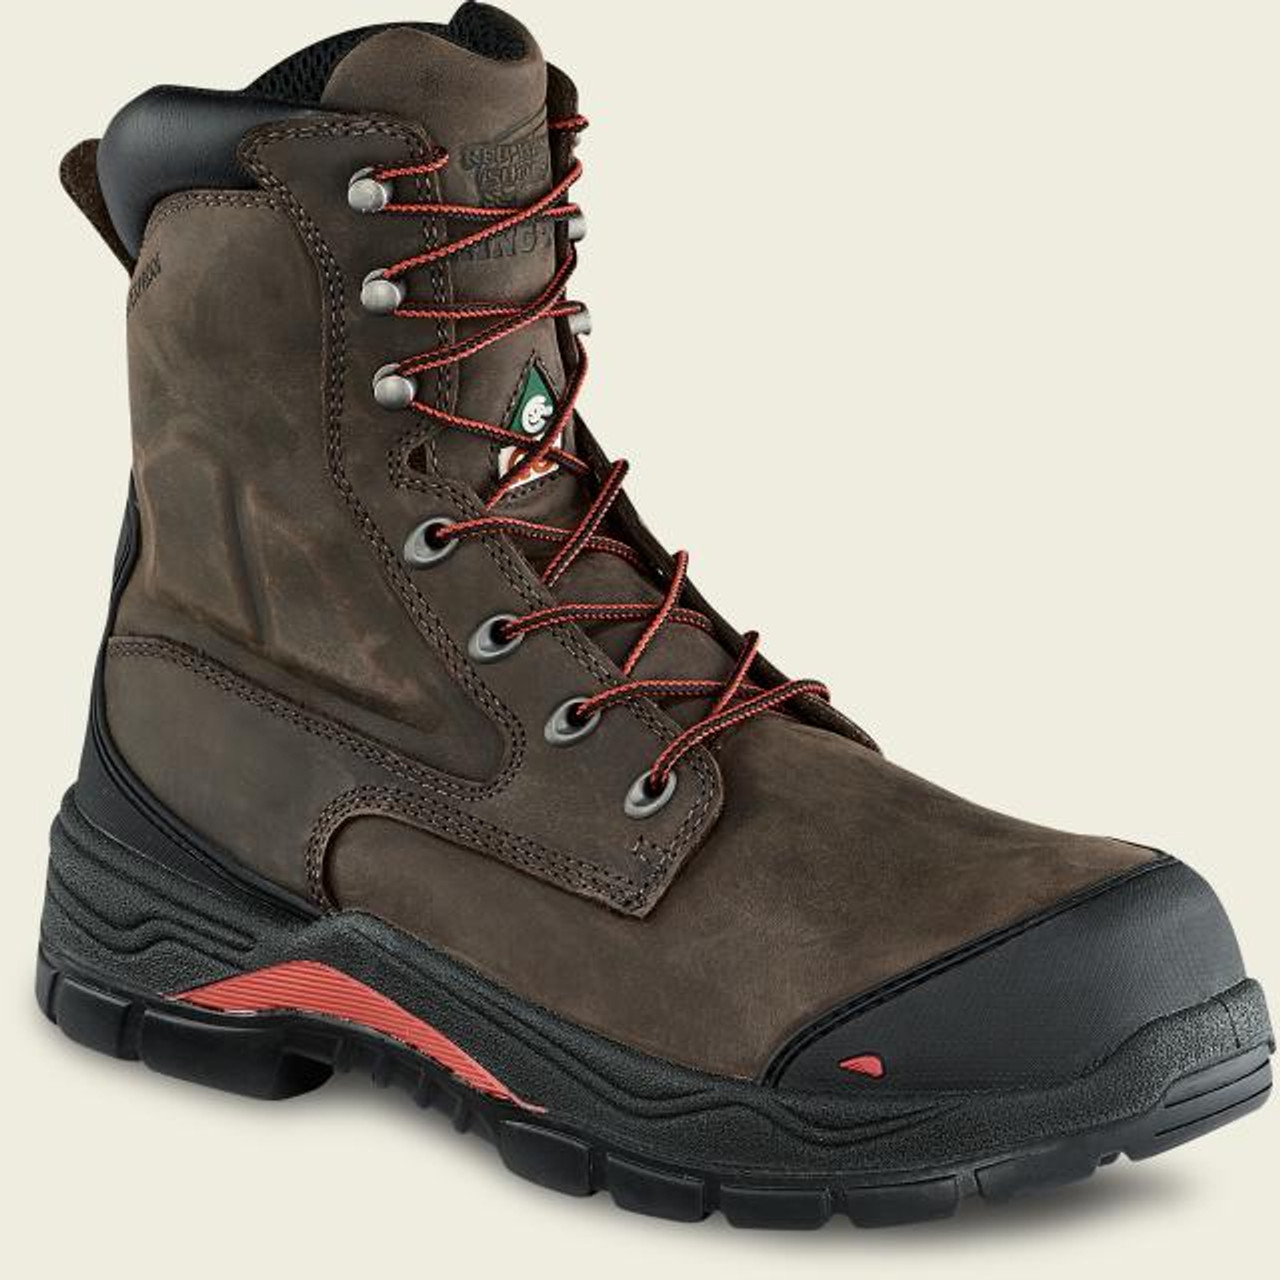 insulated construction boots